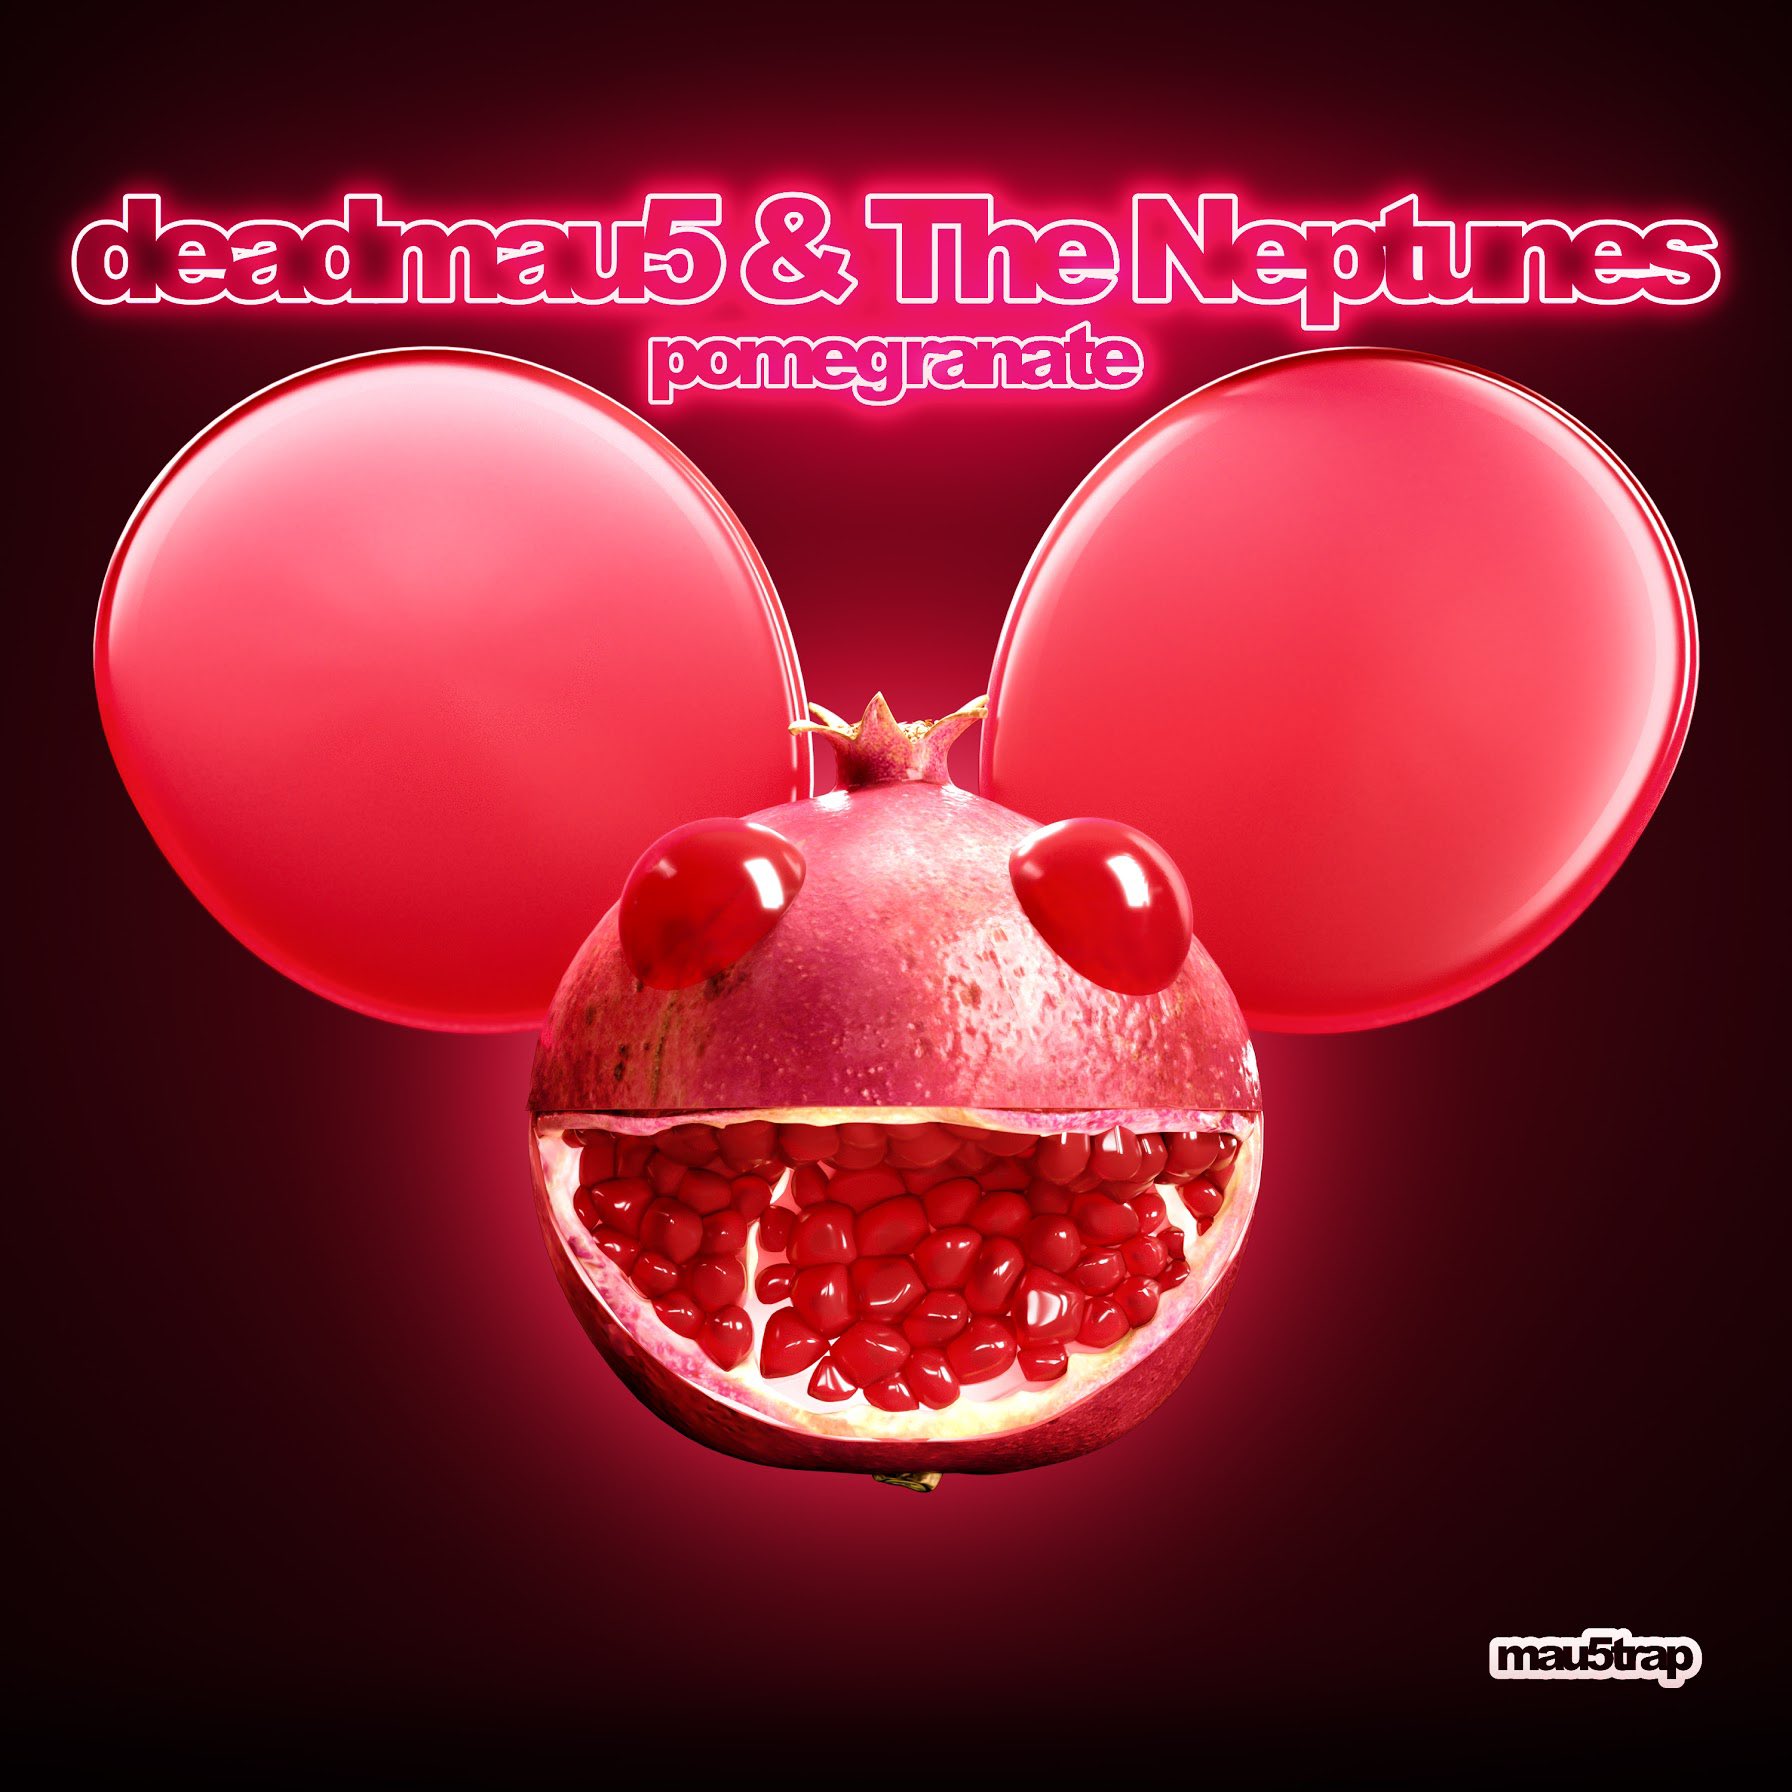 The Neptunes Collaborate With Deadmau5 On Party Jam "Pomegranate"